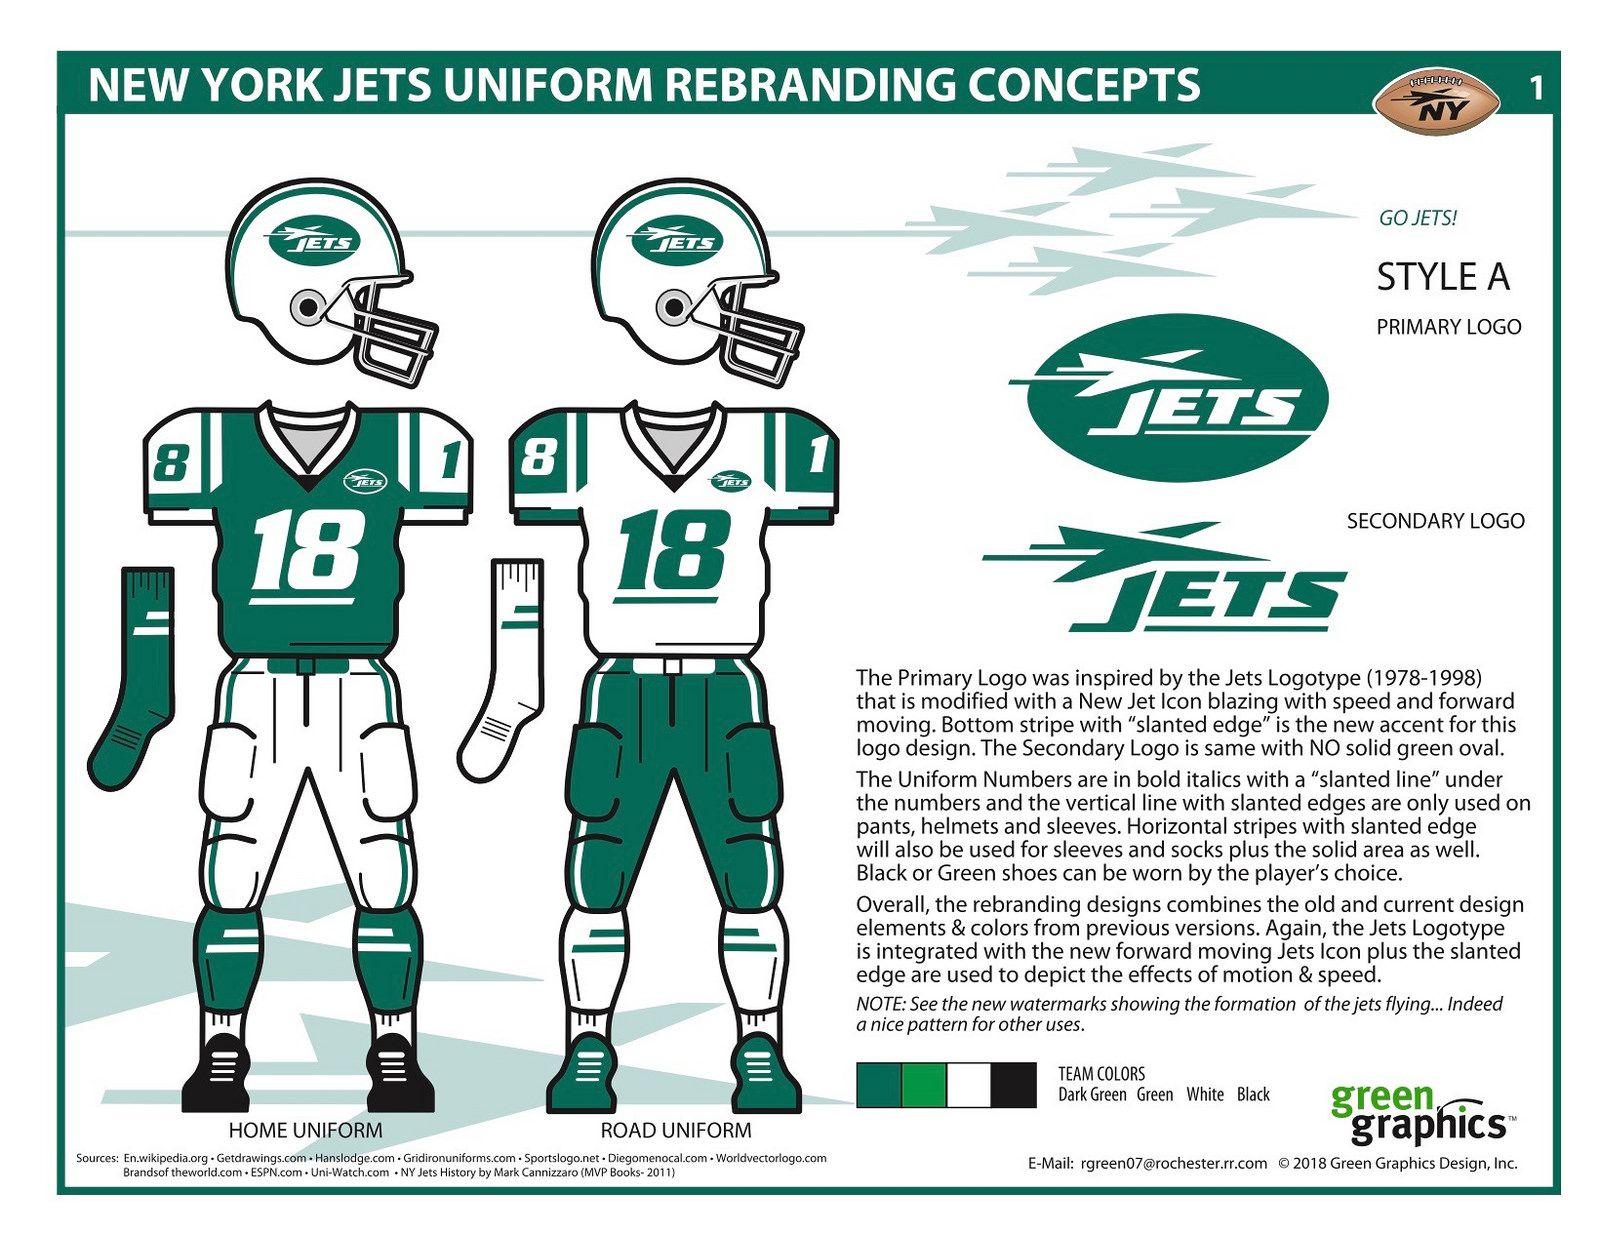 New York Jets New Logo - Uni Watch delivers the winning entries for the New York Jets